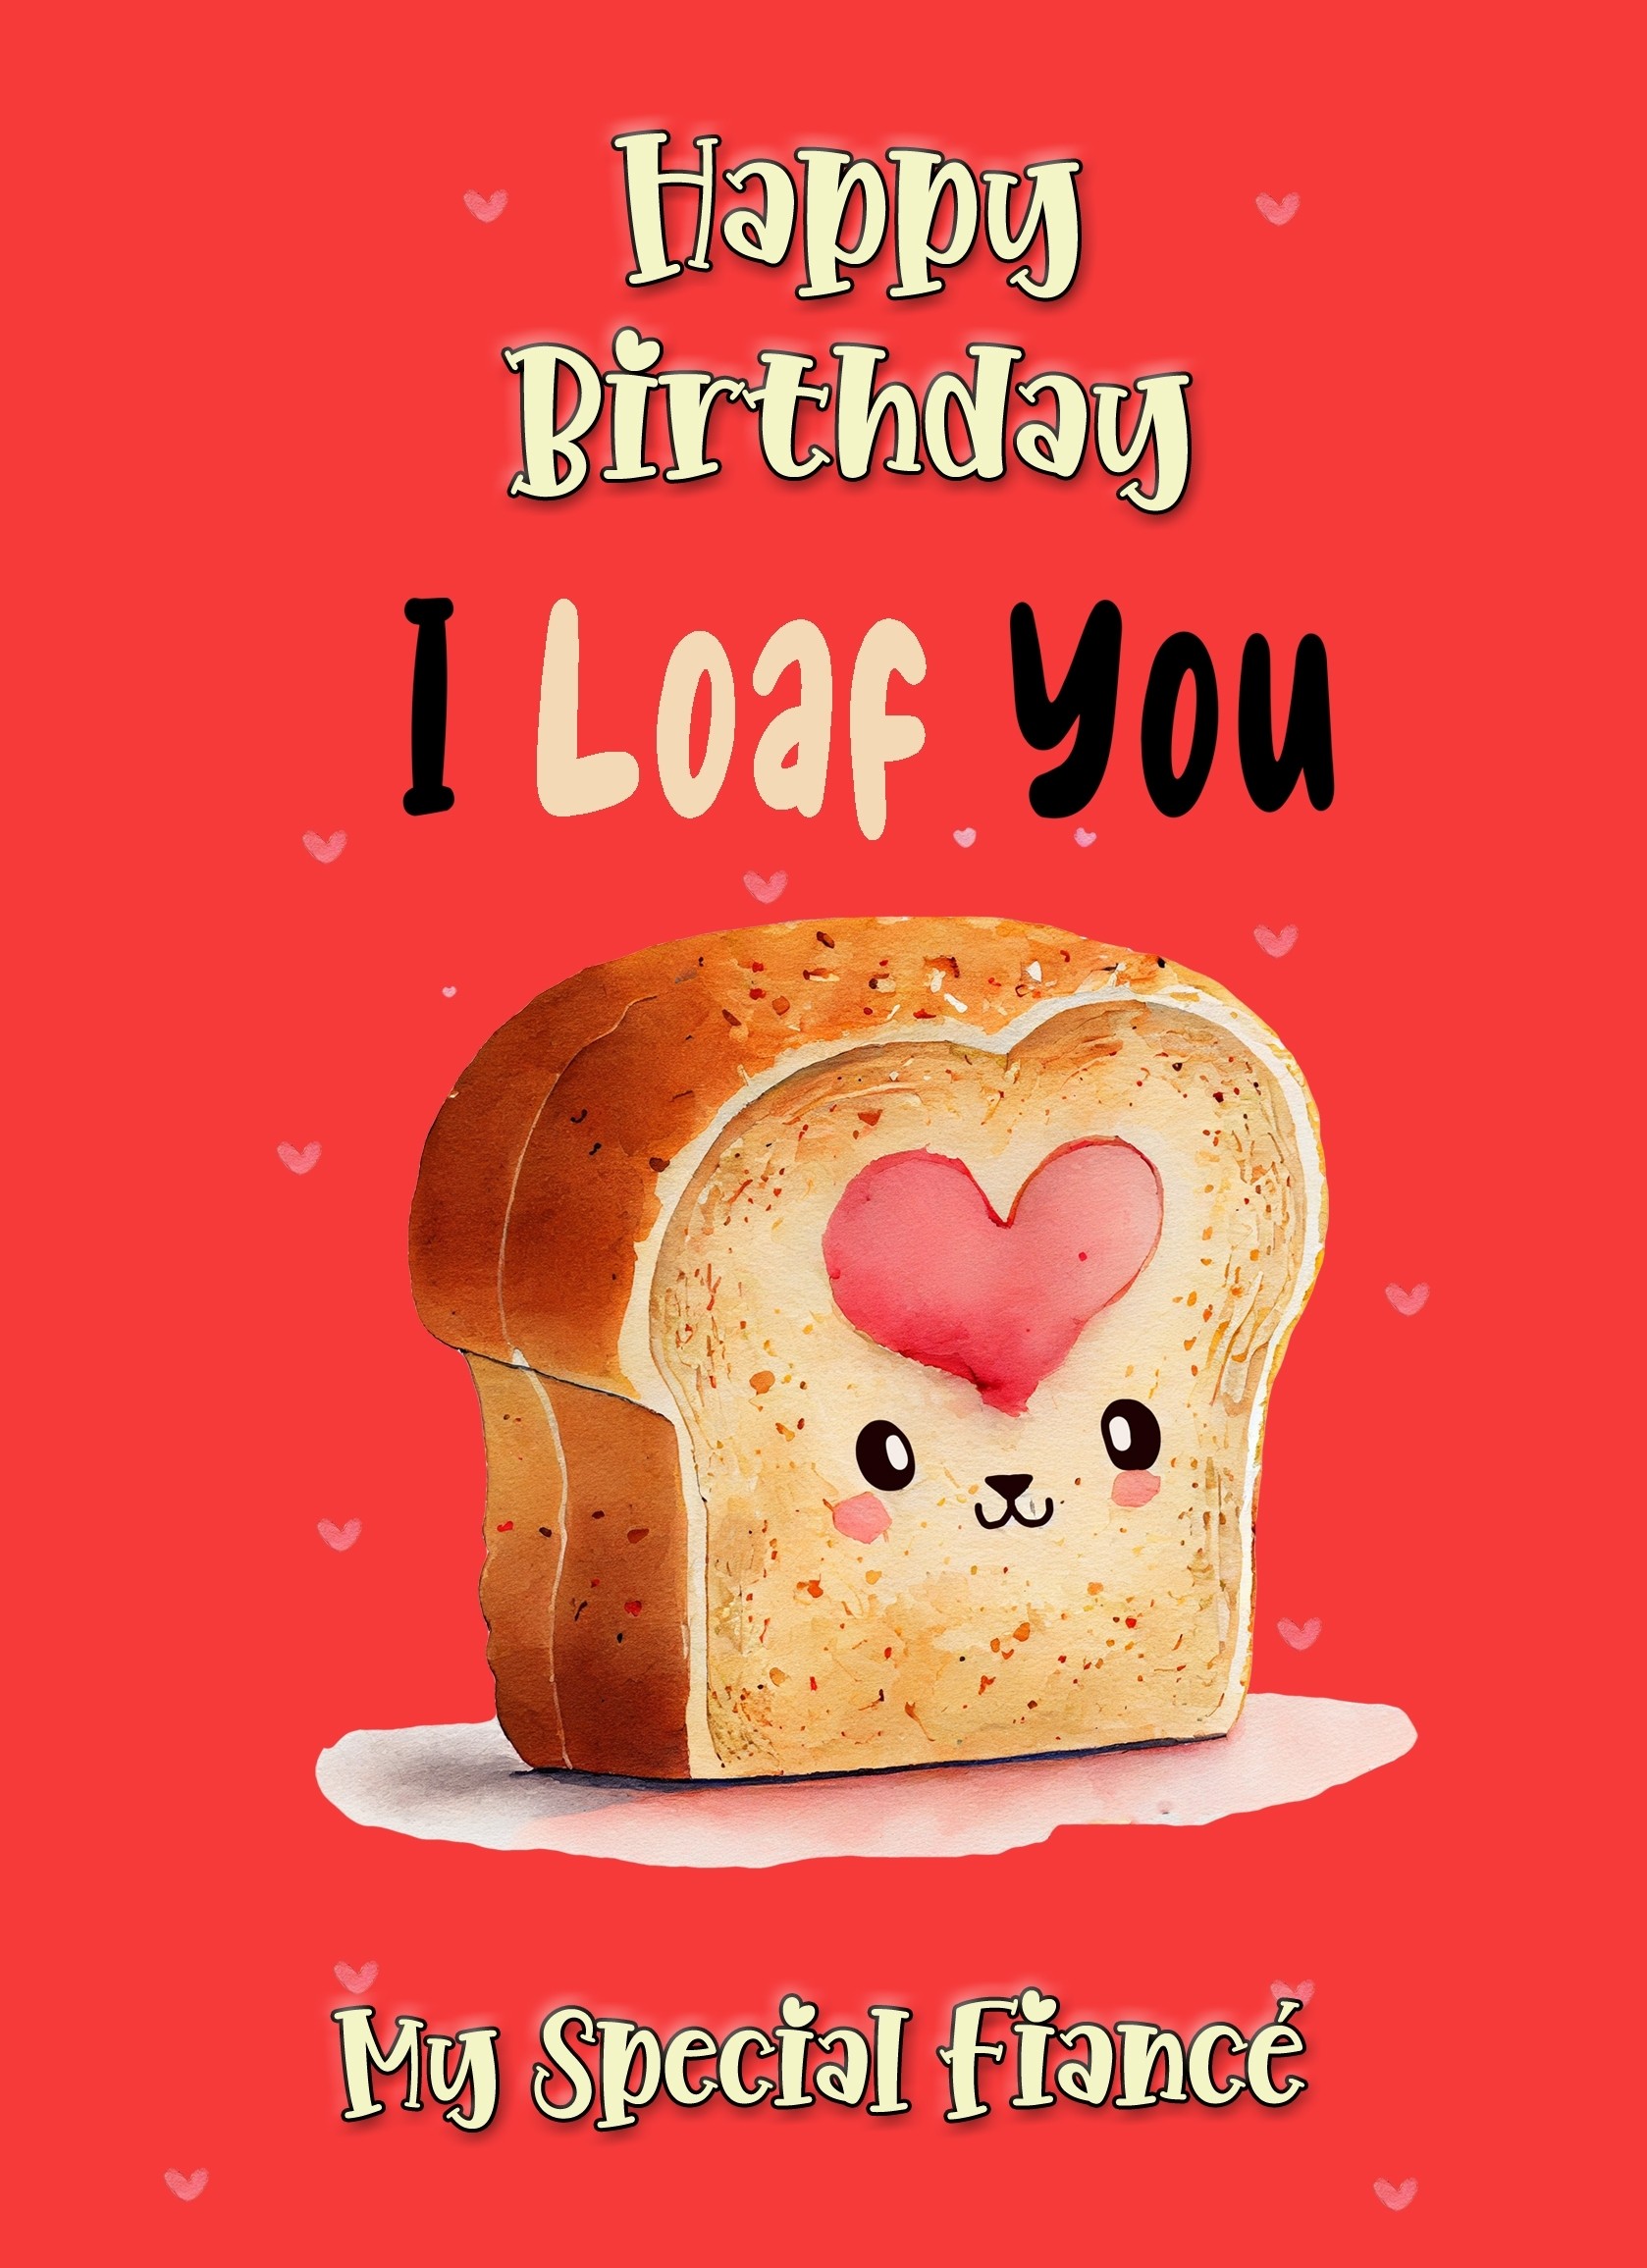 Funny Pun Romantic Birthday Card for Fiance (Loaf You)